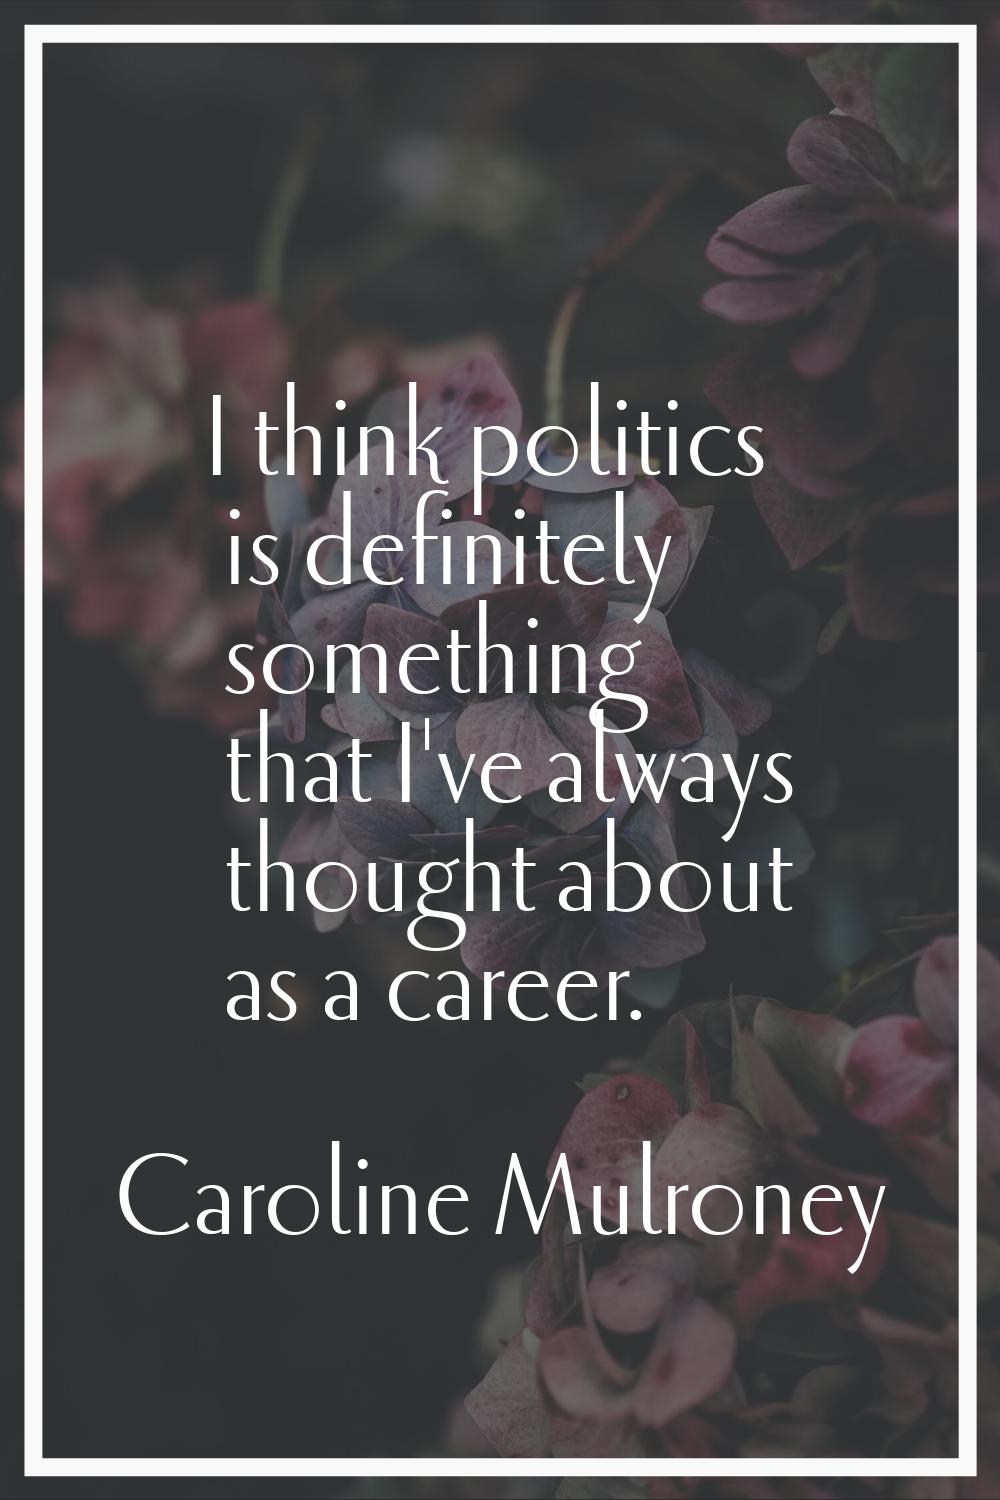 I think politics is definitely something that I've always thought about as a career.